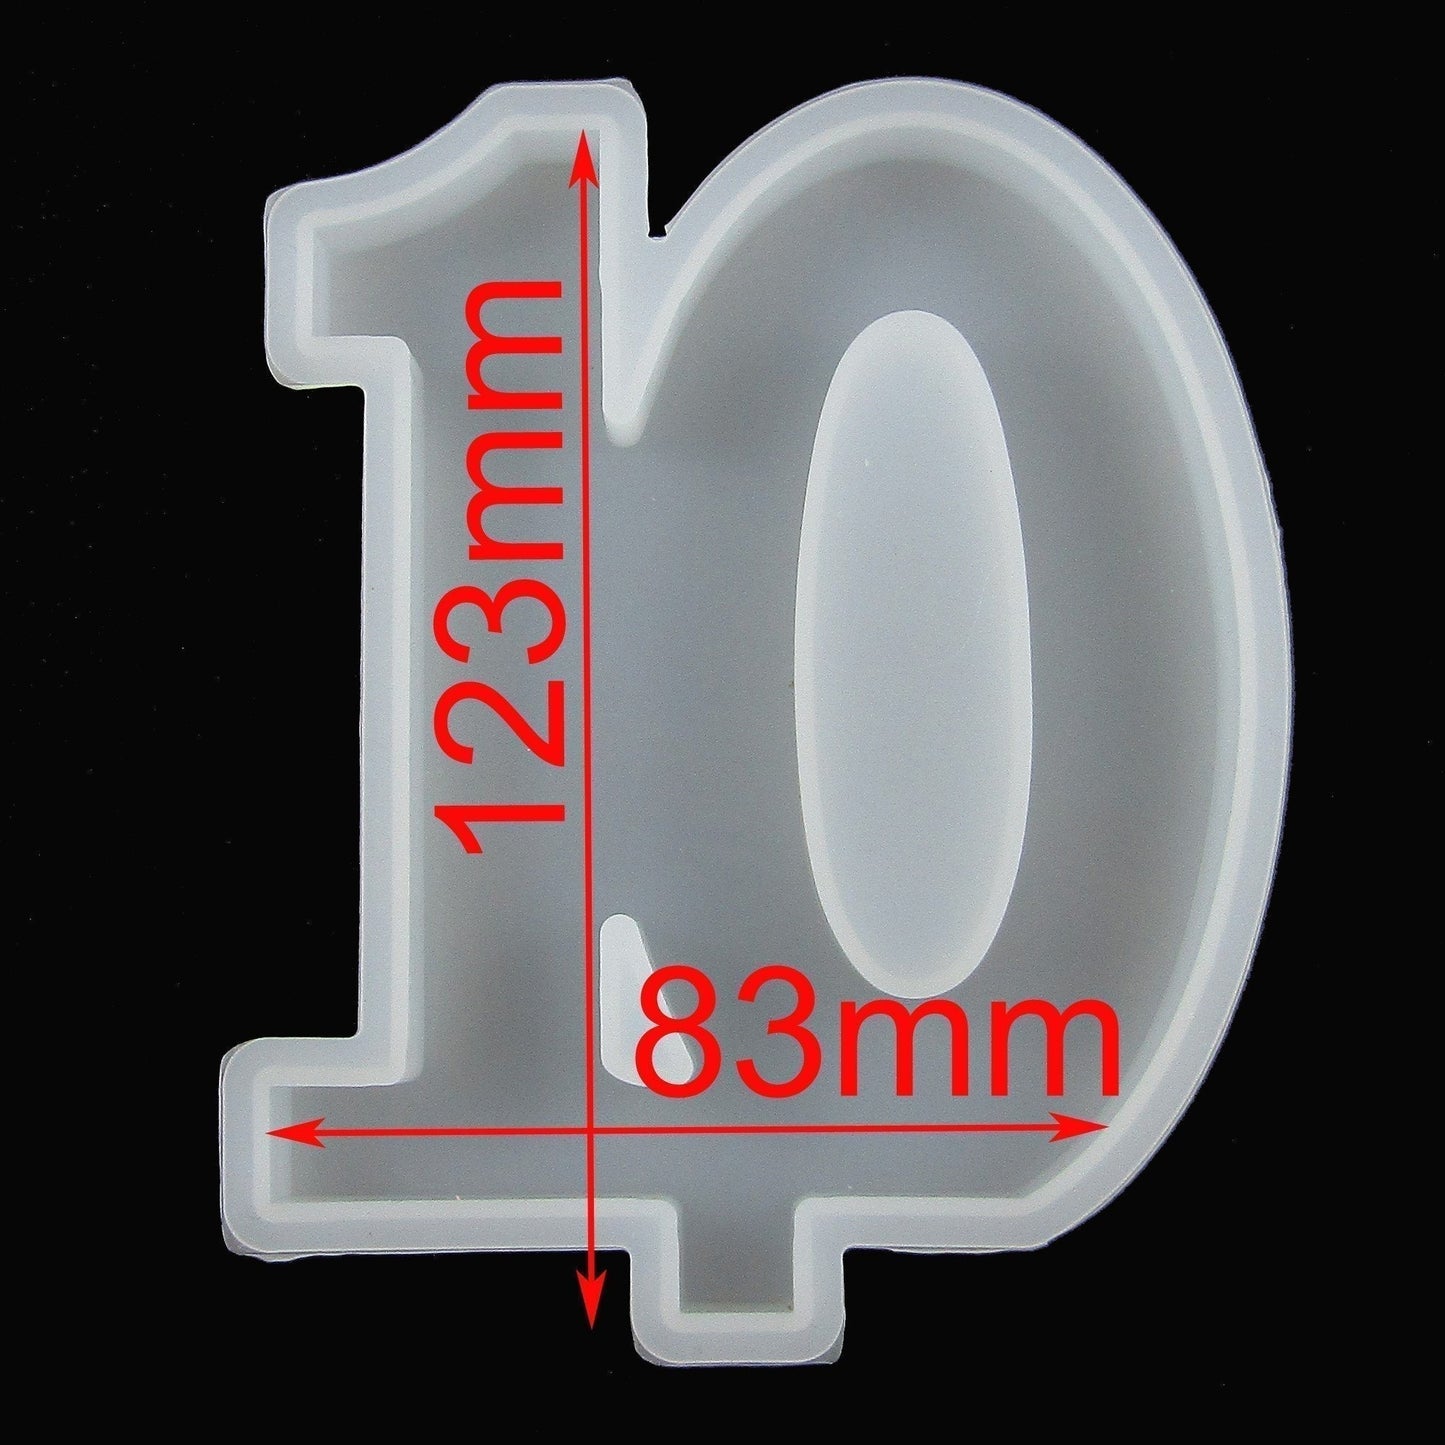 DIY Candle Birthday Number 10 Silicone Casting Mould for Epoxy Resin